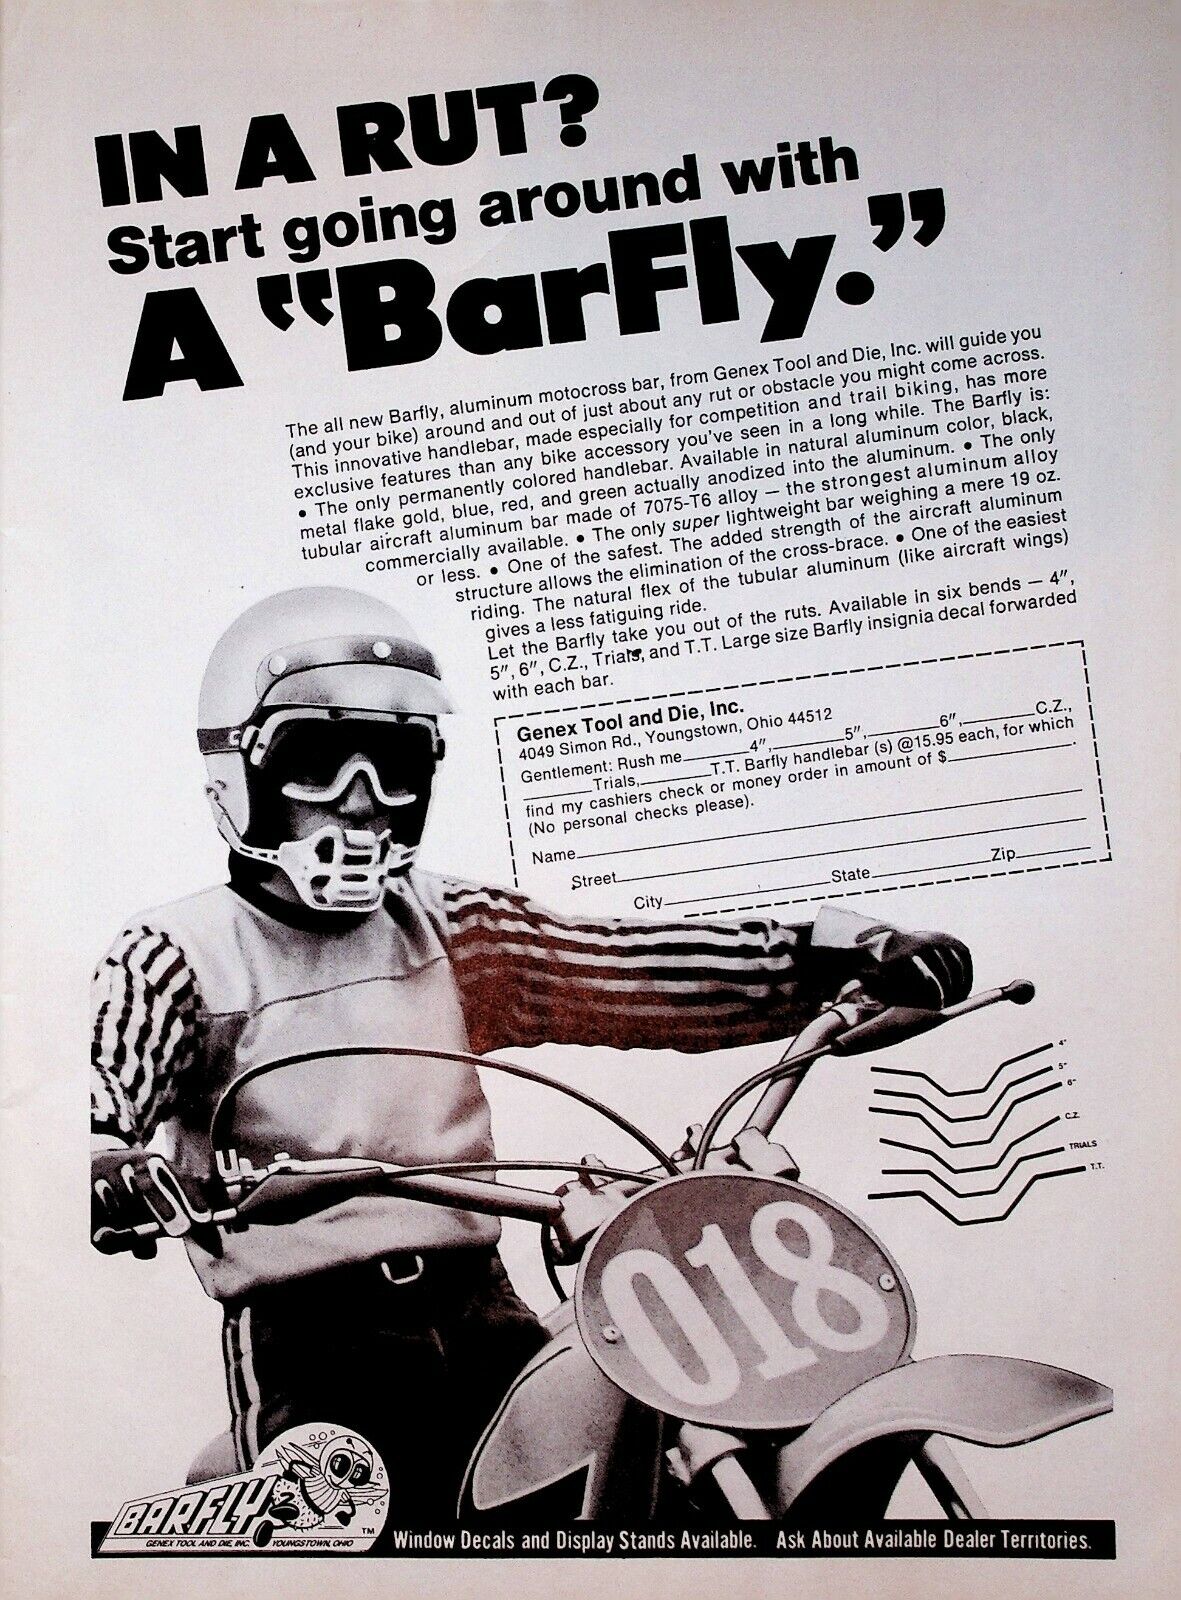 1975 Barfly Motocross Bar Genex Tool & Die Youngstown OH - Vintage Motorcycle Ad